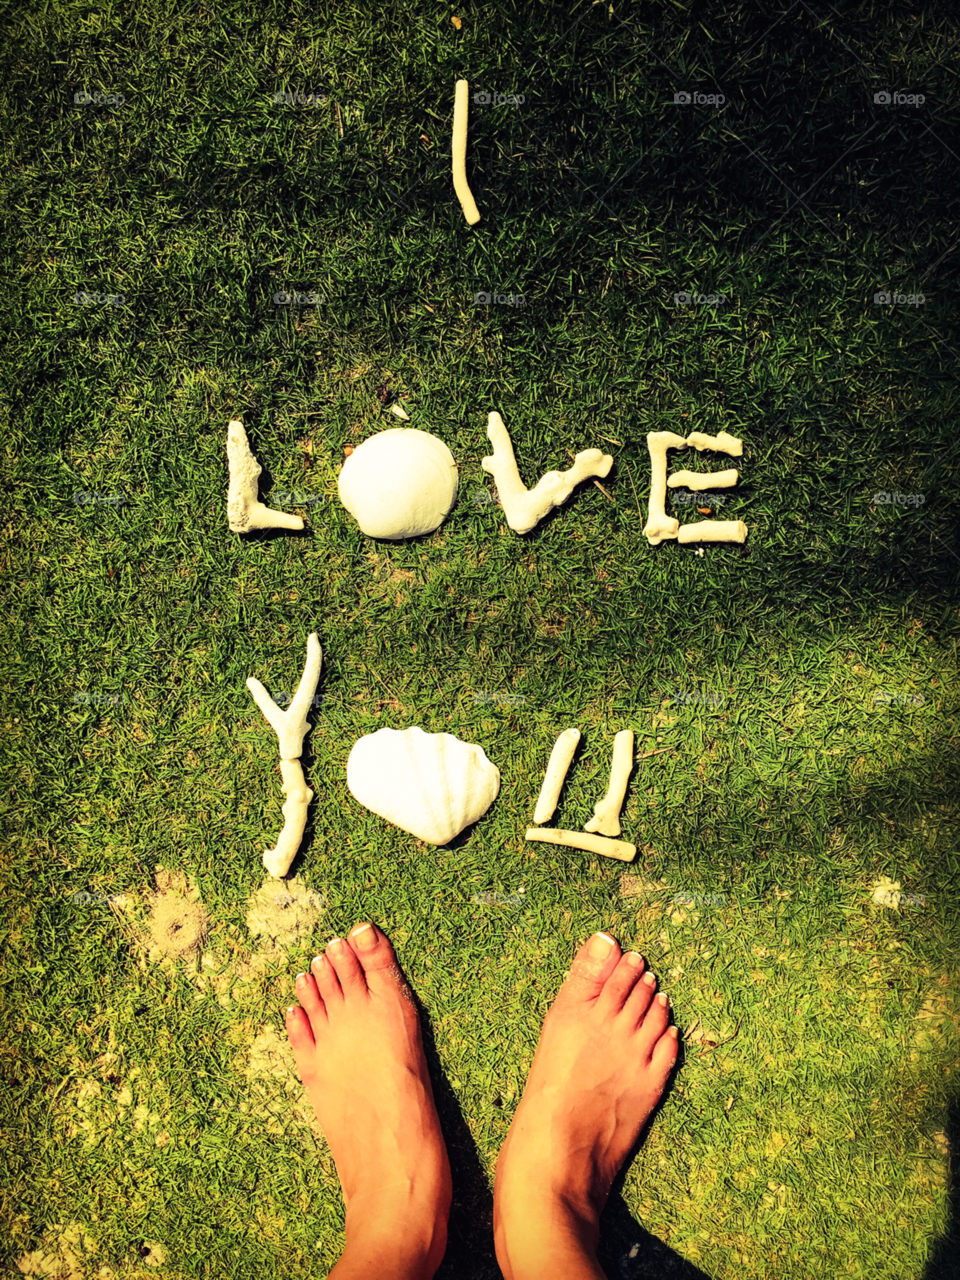 "I love you" sign formed using shells